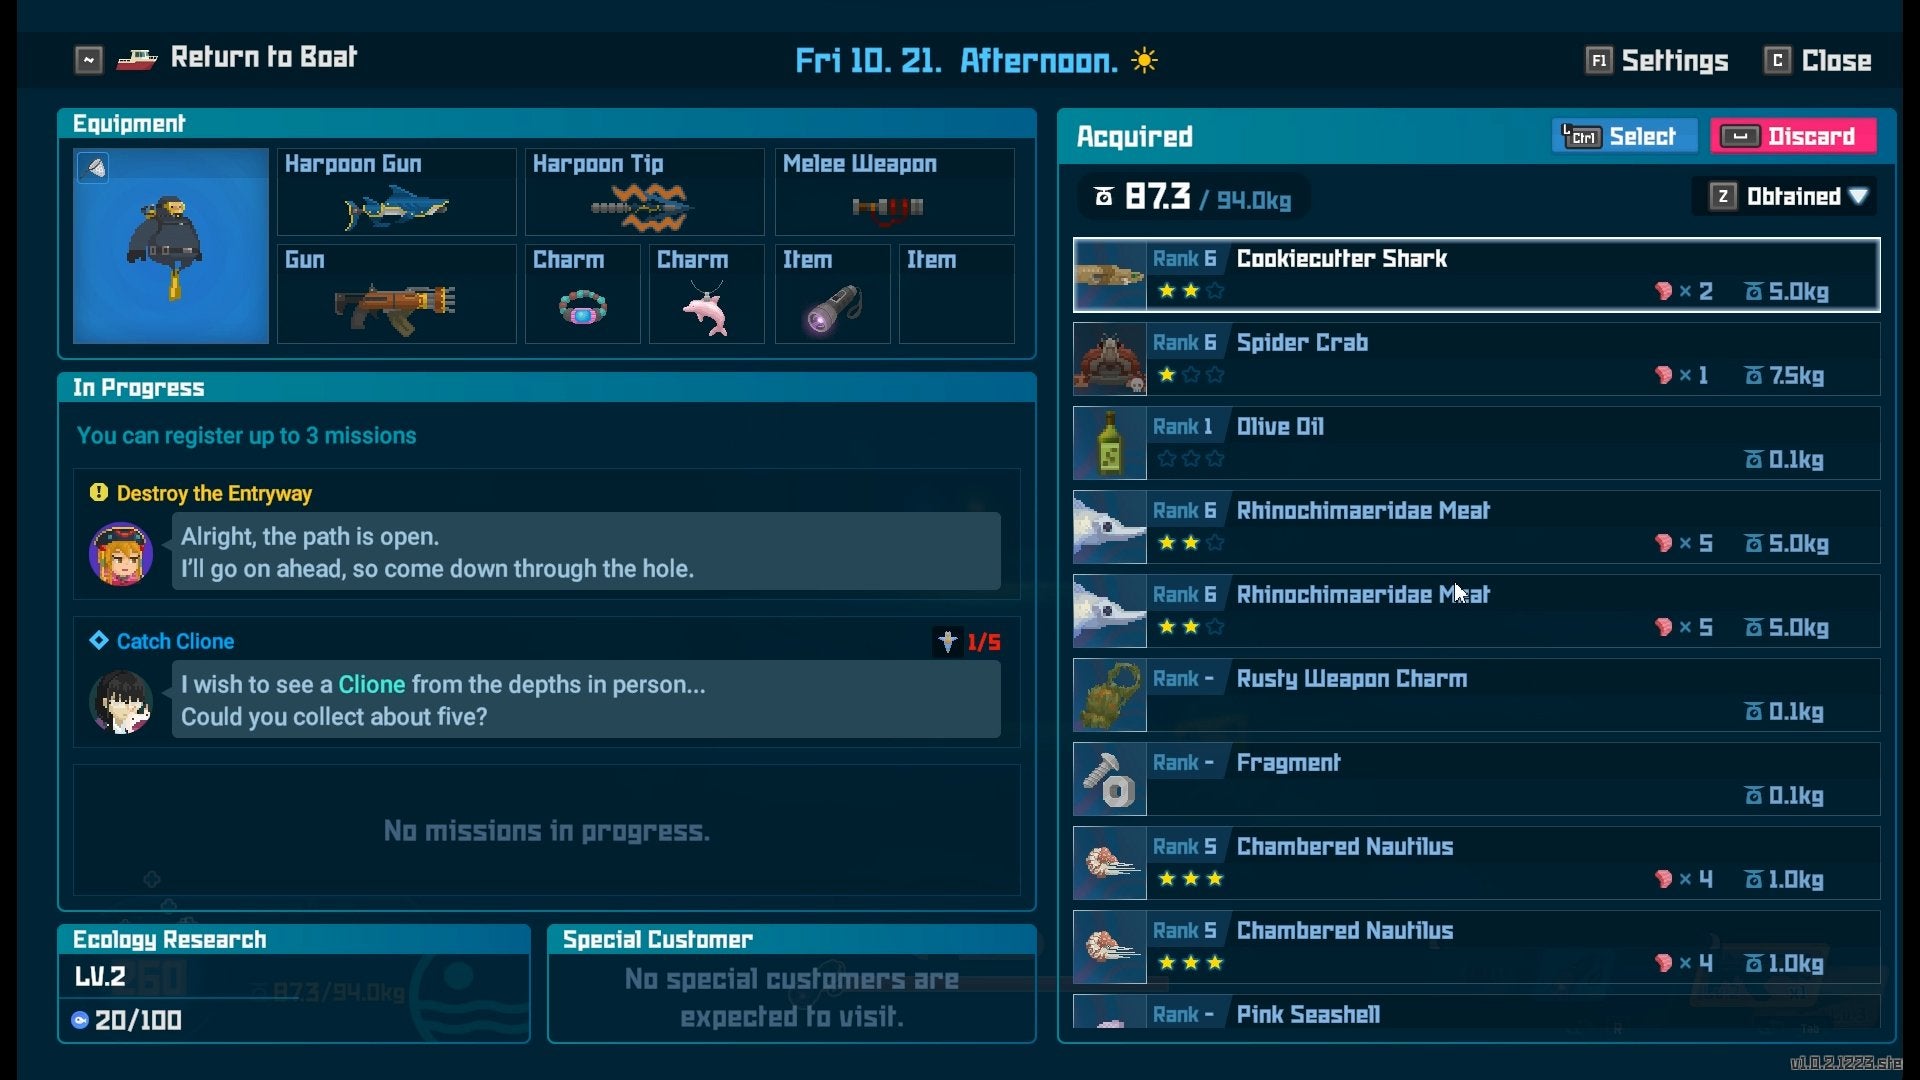 A Spider Crab in the player's inventory.